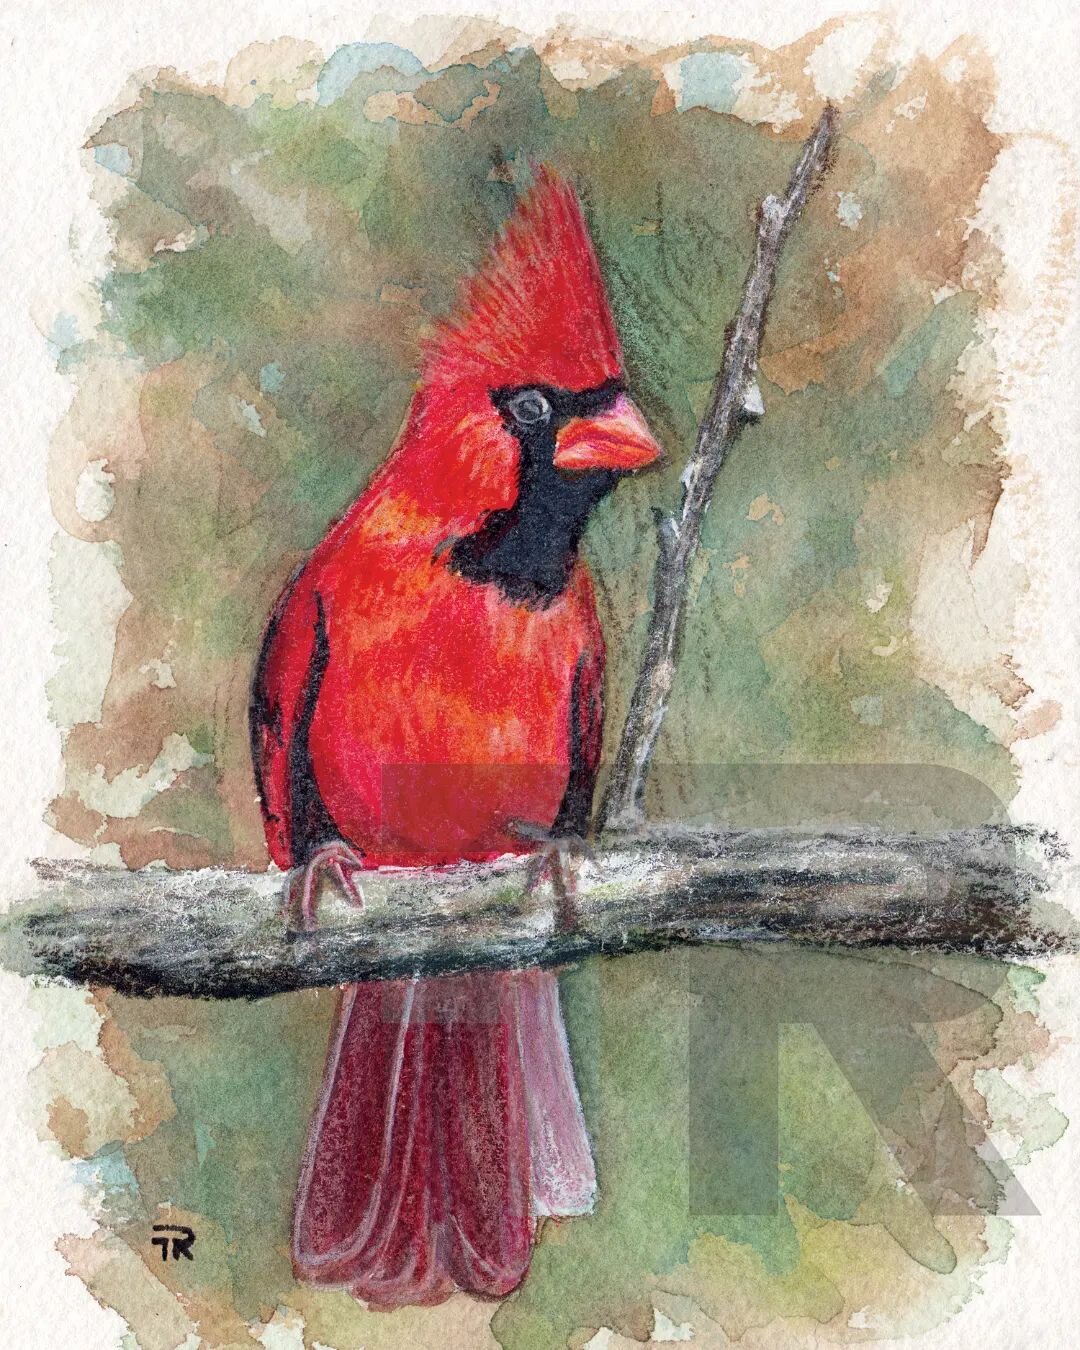 The Cardinal card sold out at my last event! However I just reprint and cut a whole new set for tomorrow, for the Romulus Flowers in the Mitten event! #cardinal #birdpainting